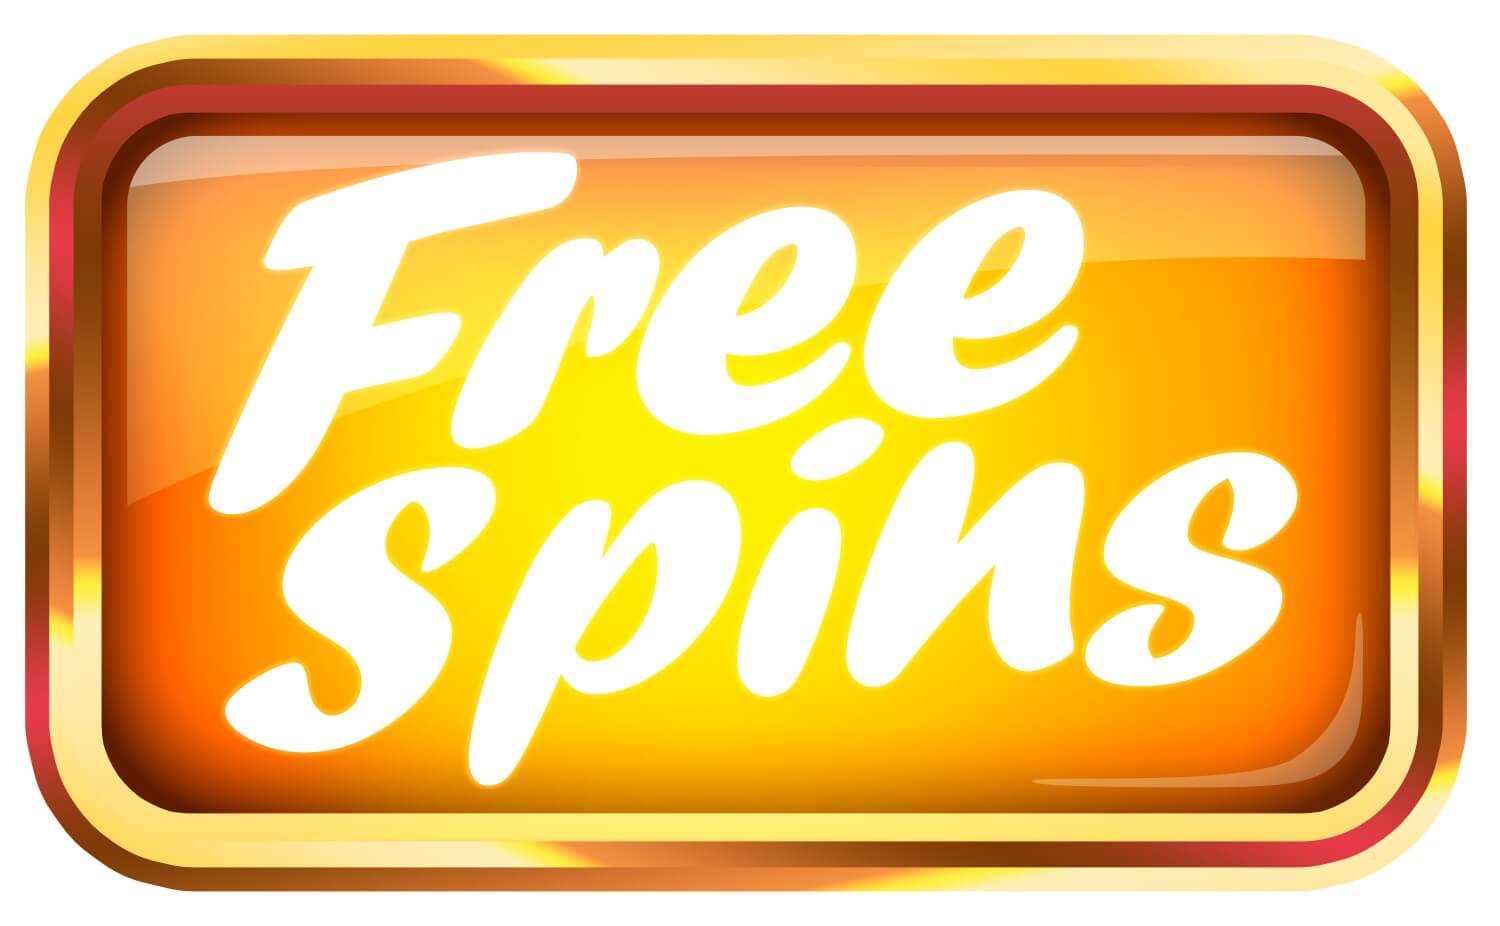 dazzle me free spins